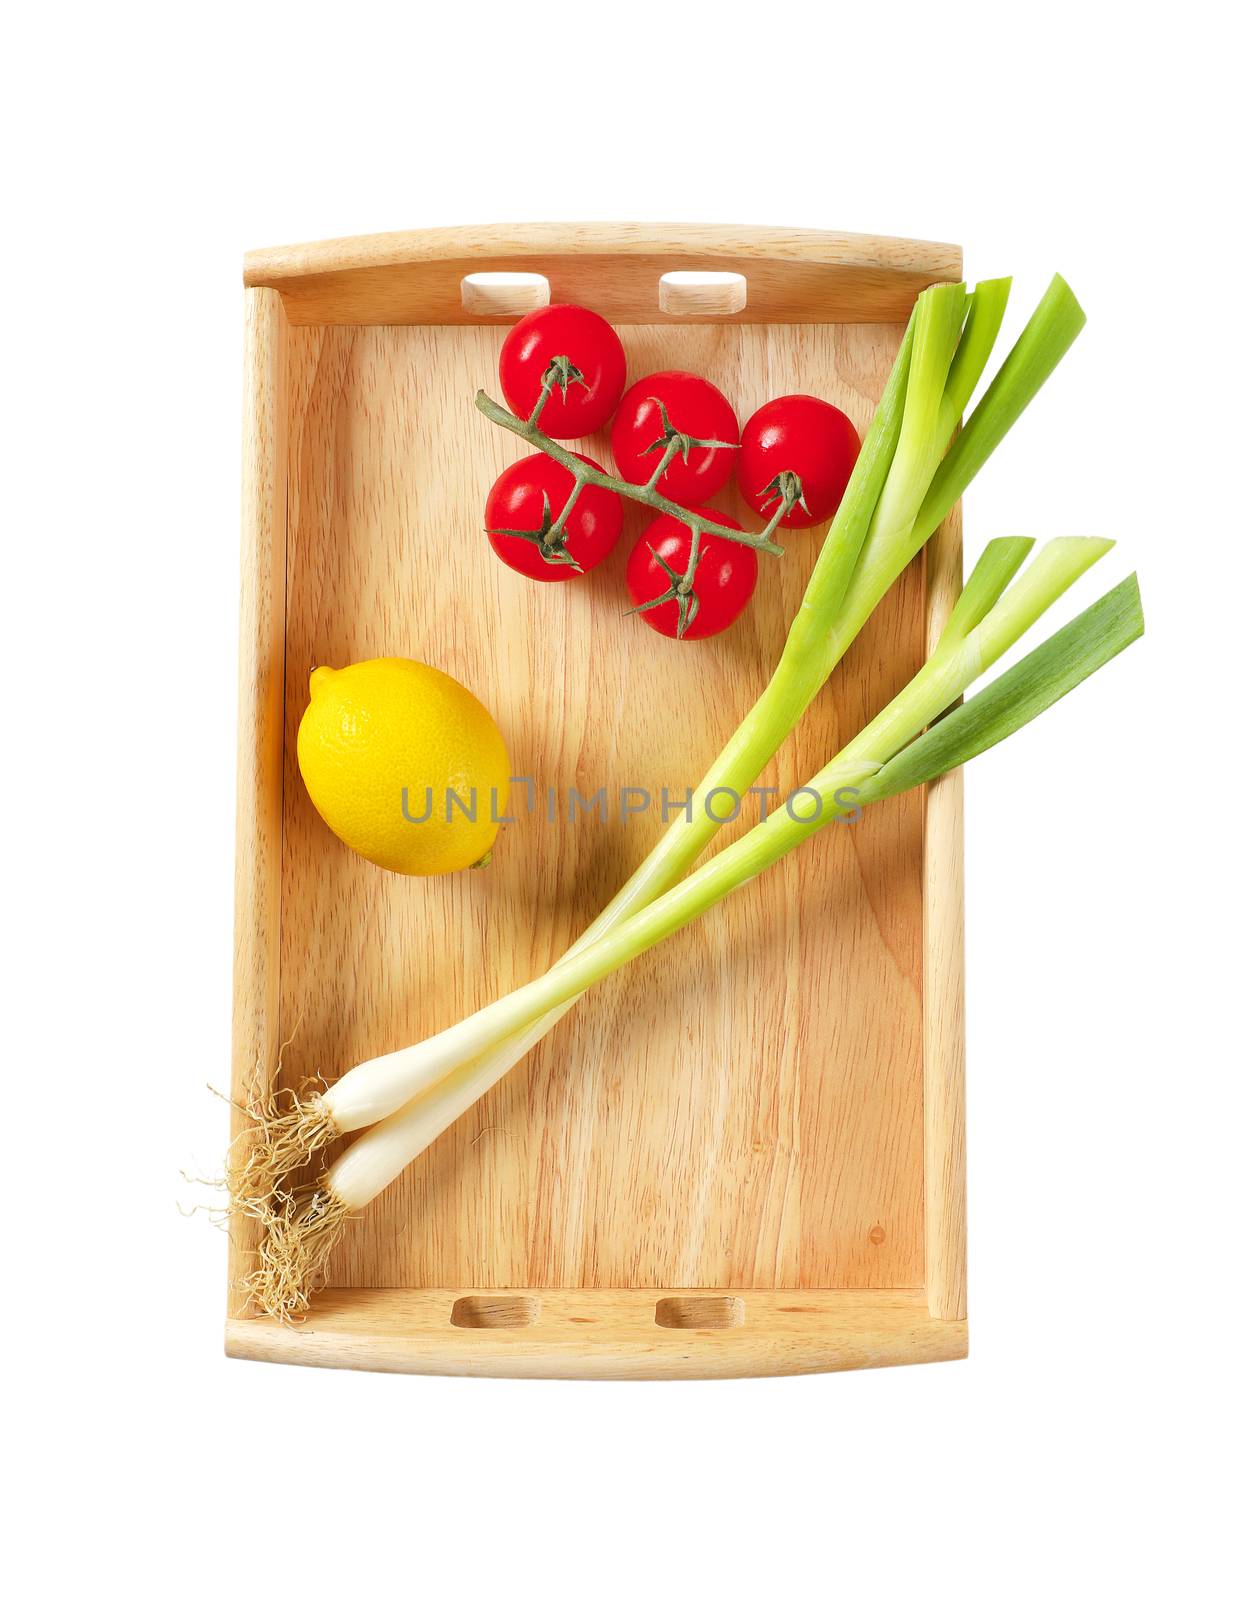 Spring onion, tomatoes and lemon on wooden serving tray isolated on white